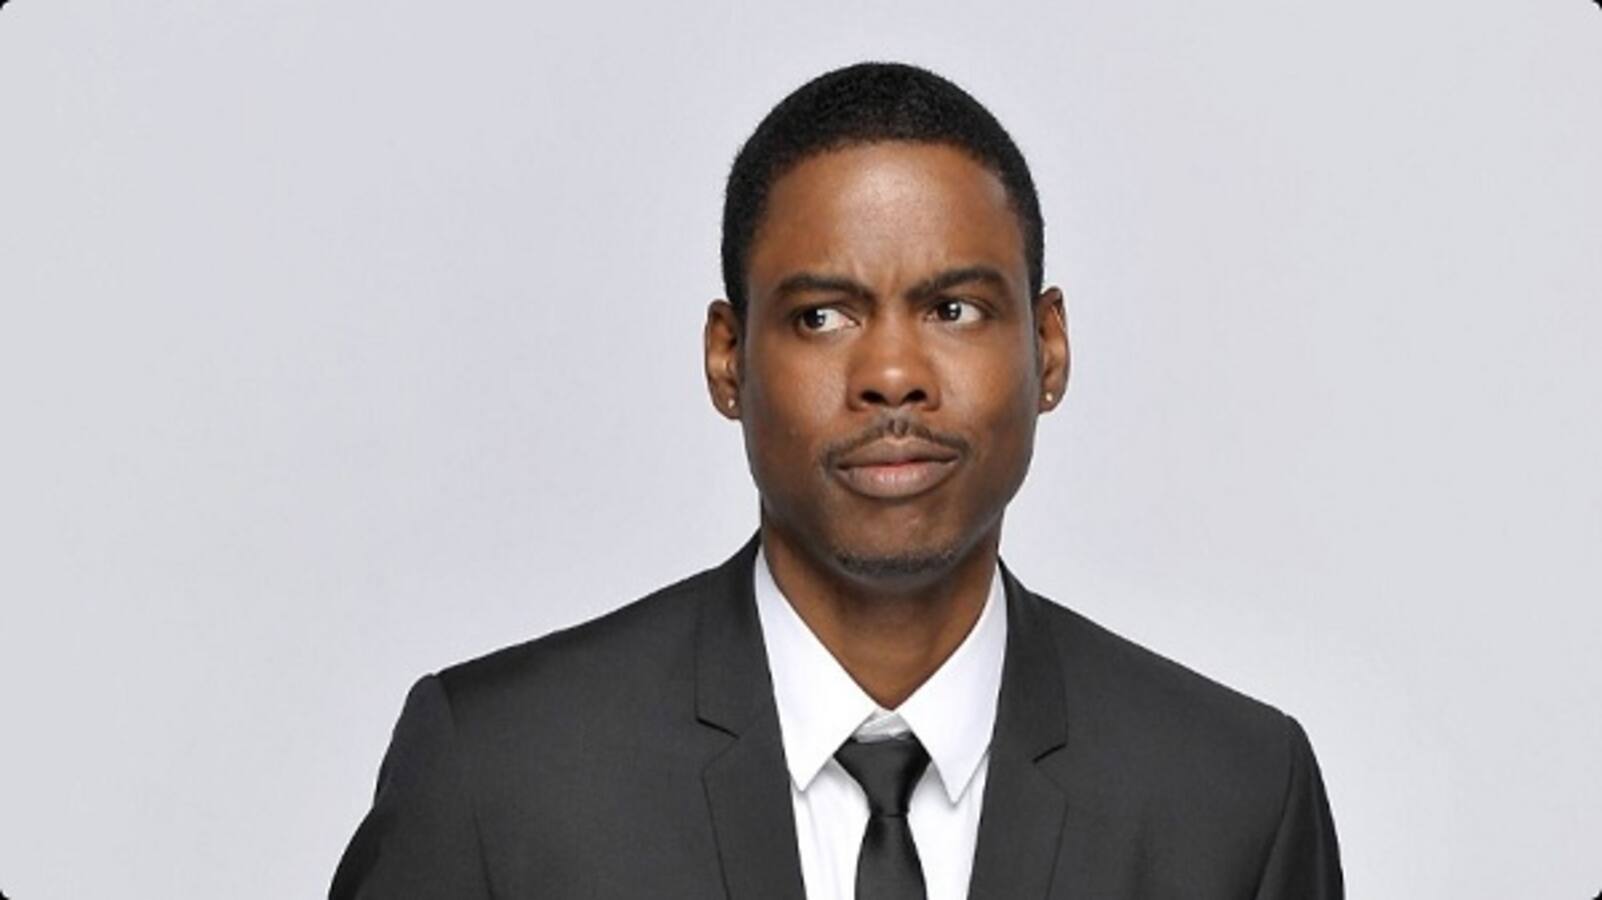 Academy Awards producers are prepared for host Chris Rock's controversial statements!